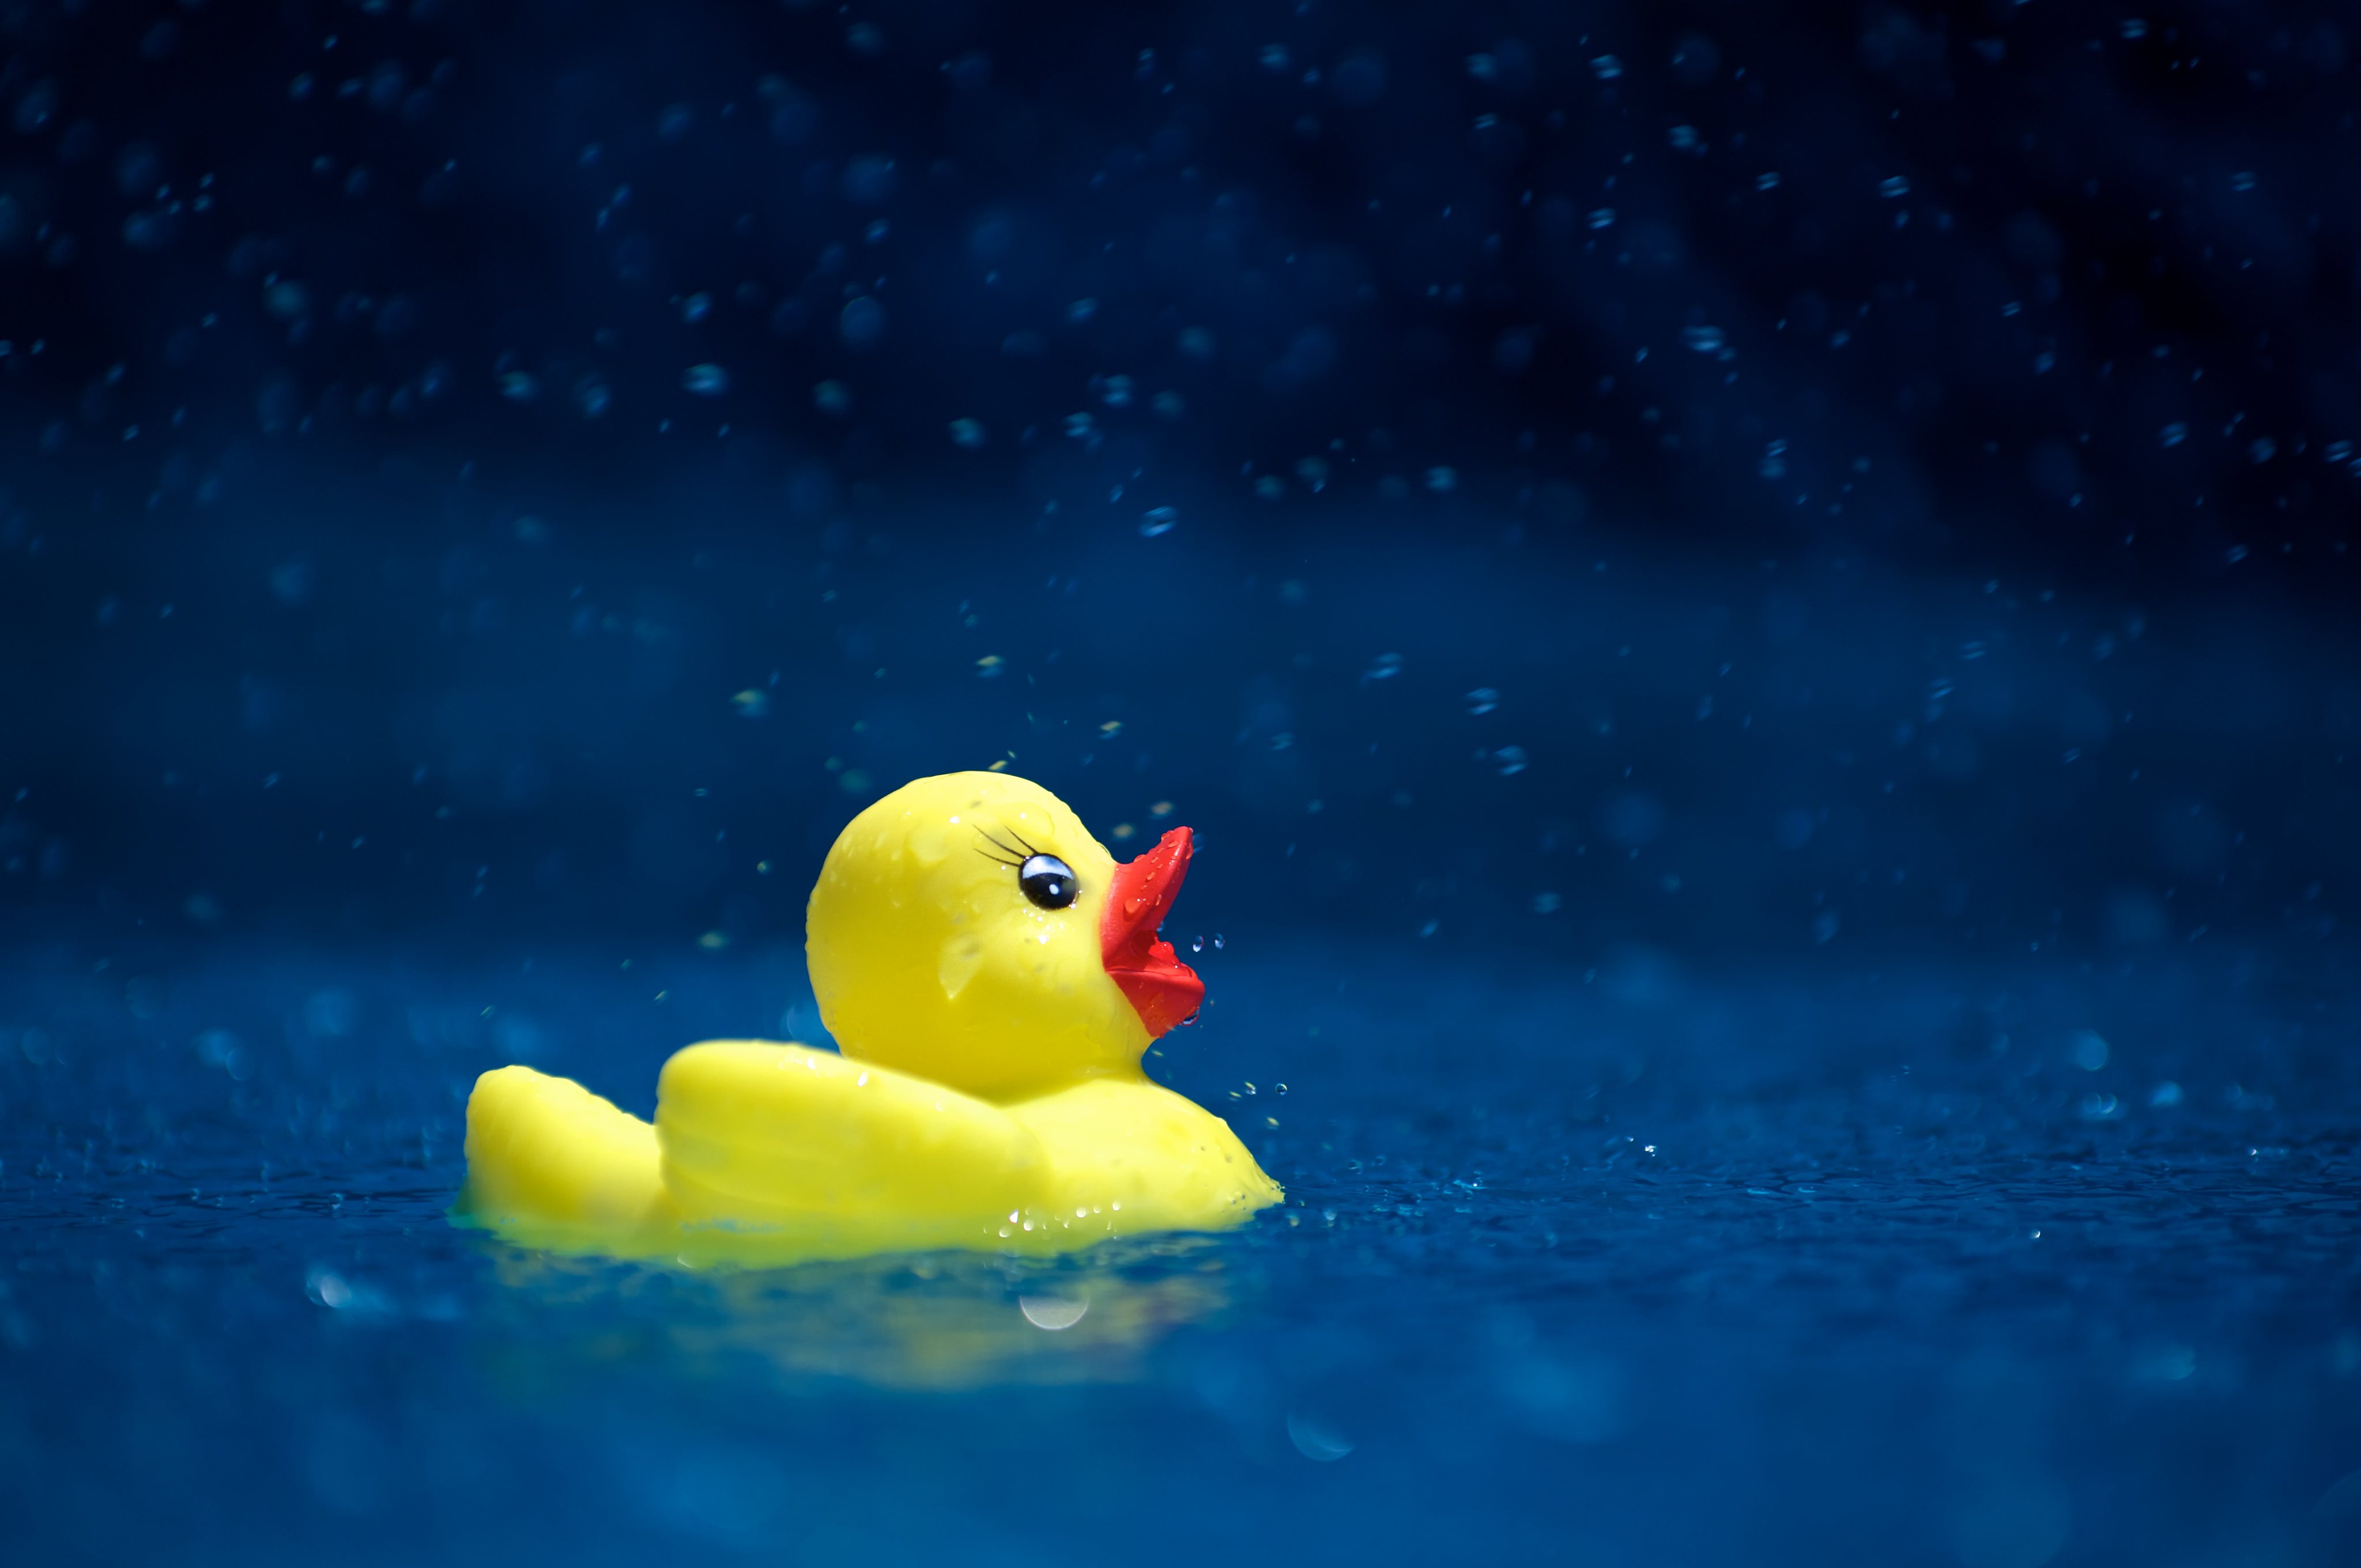 toy, drops, water, miscellanea, miscellaneous, spray, duckling Full HD